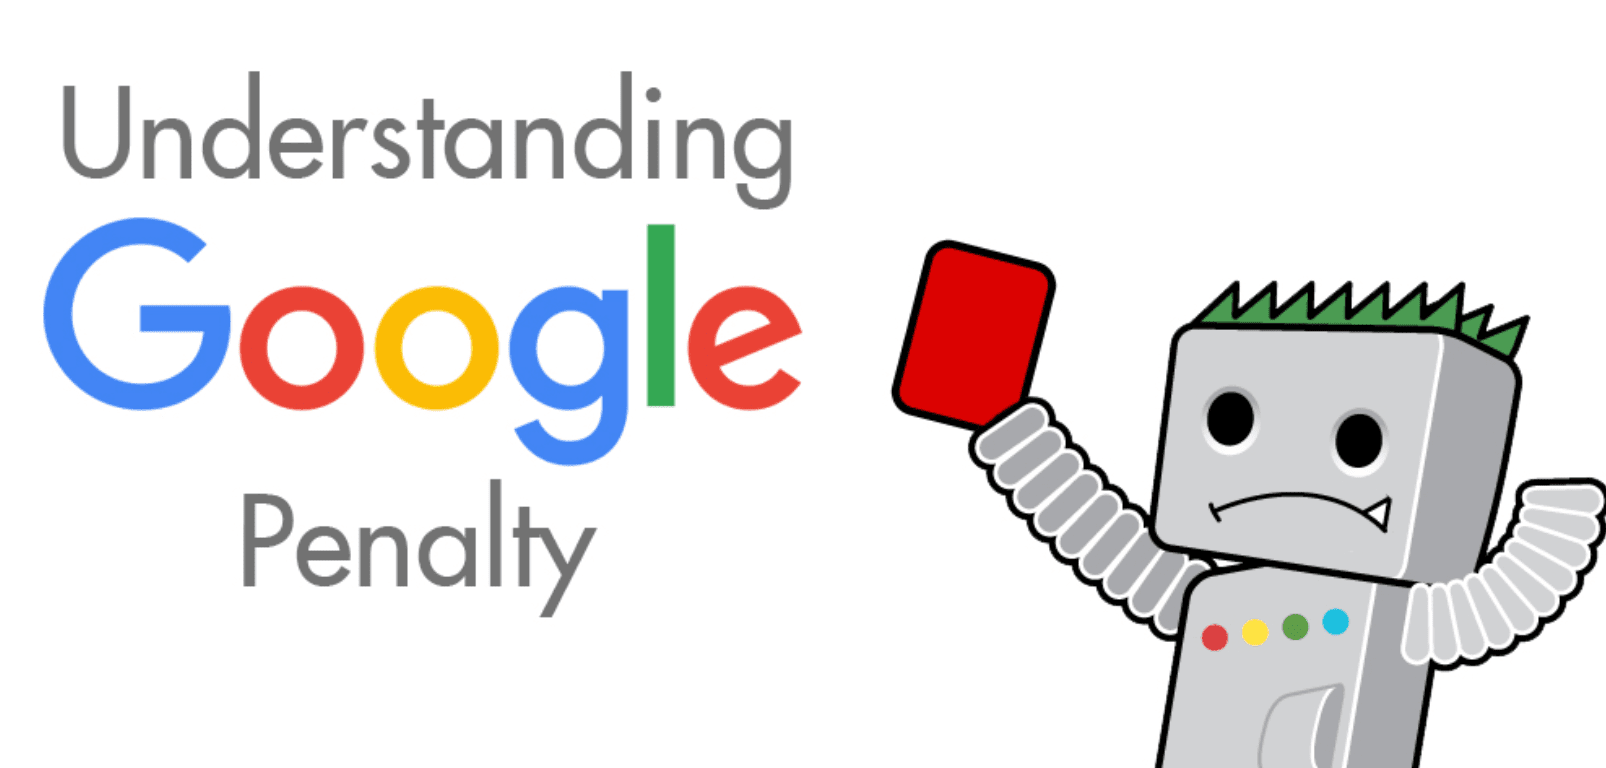 How to Find Out If Your Website is Penalized by Google or Not